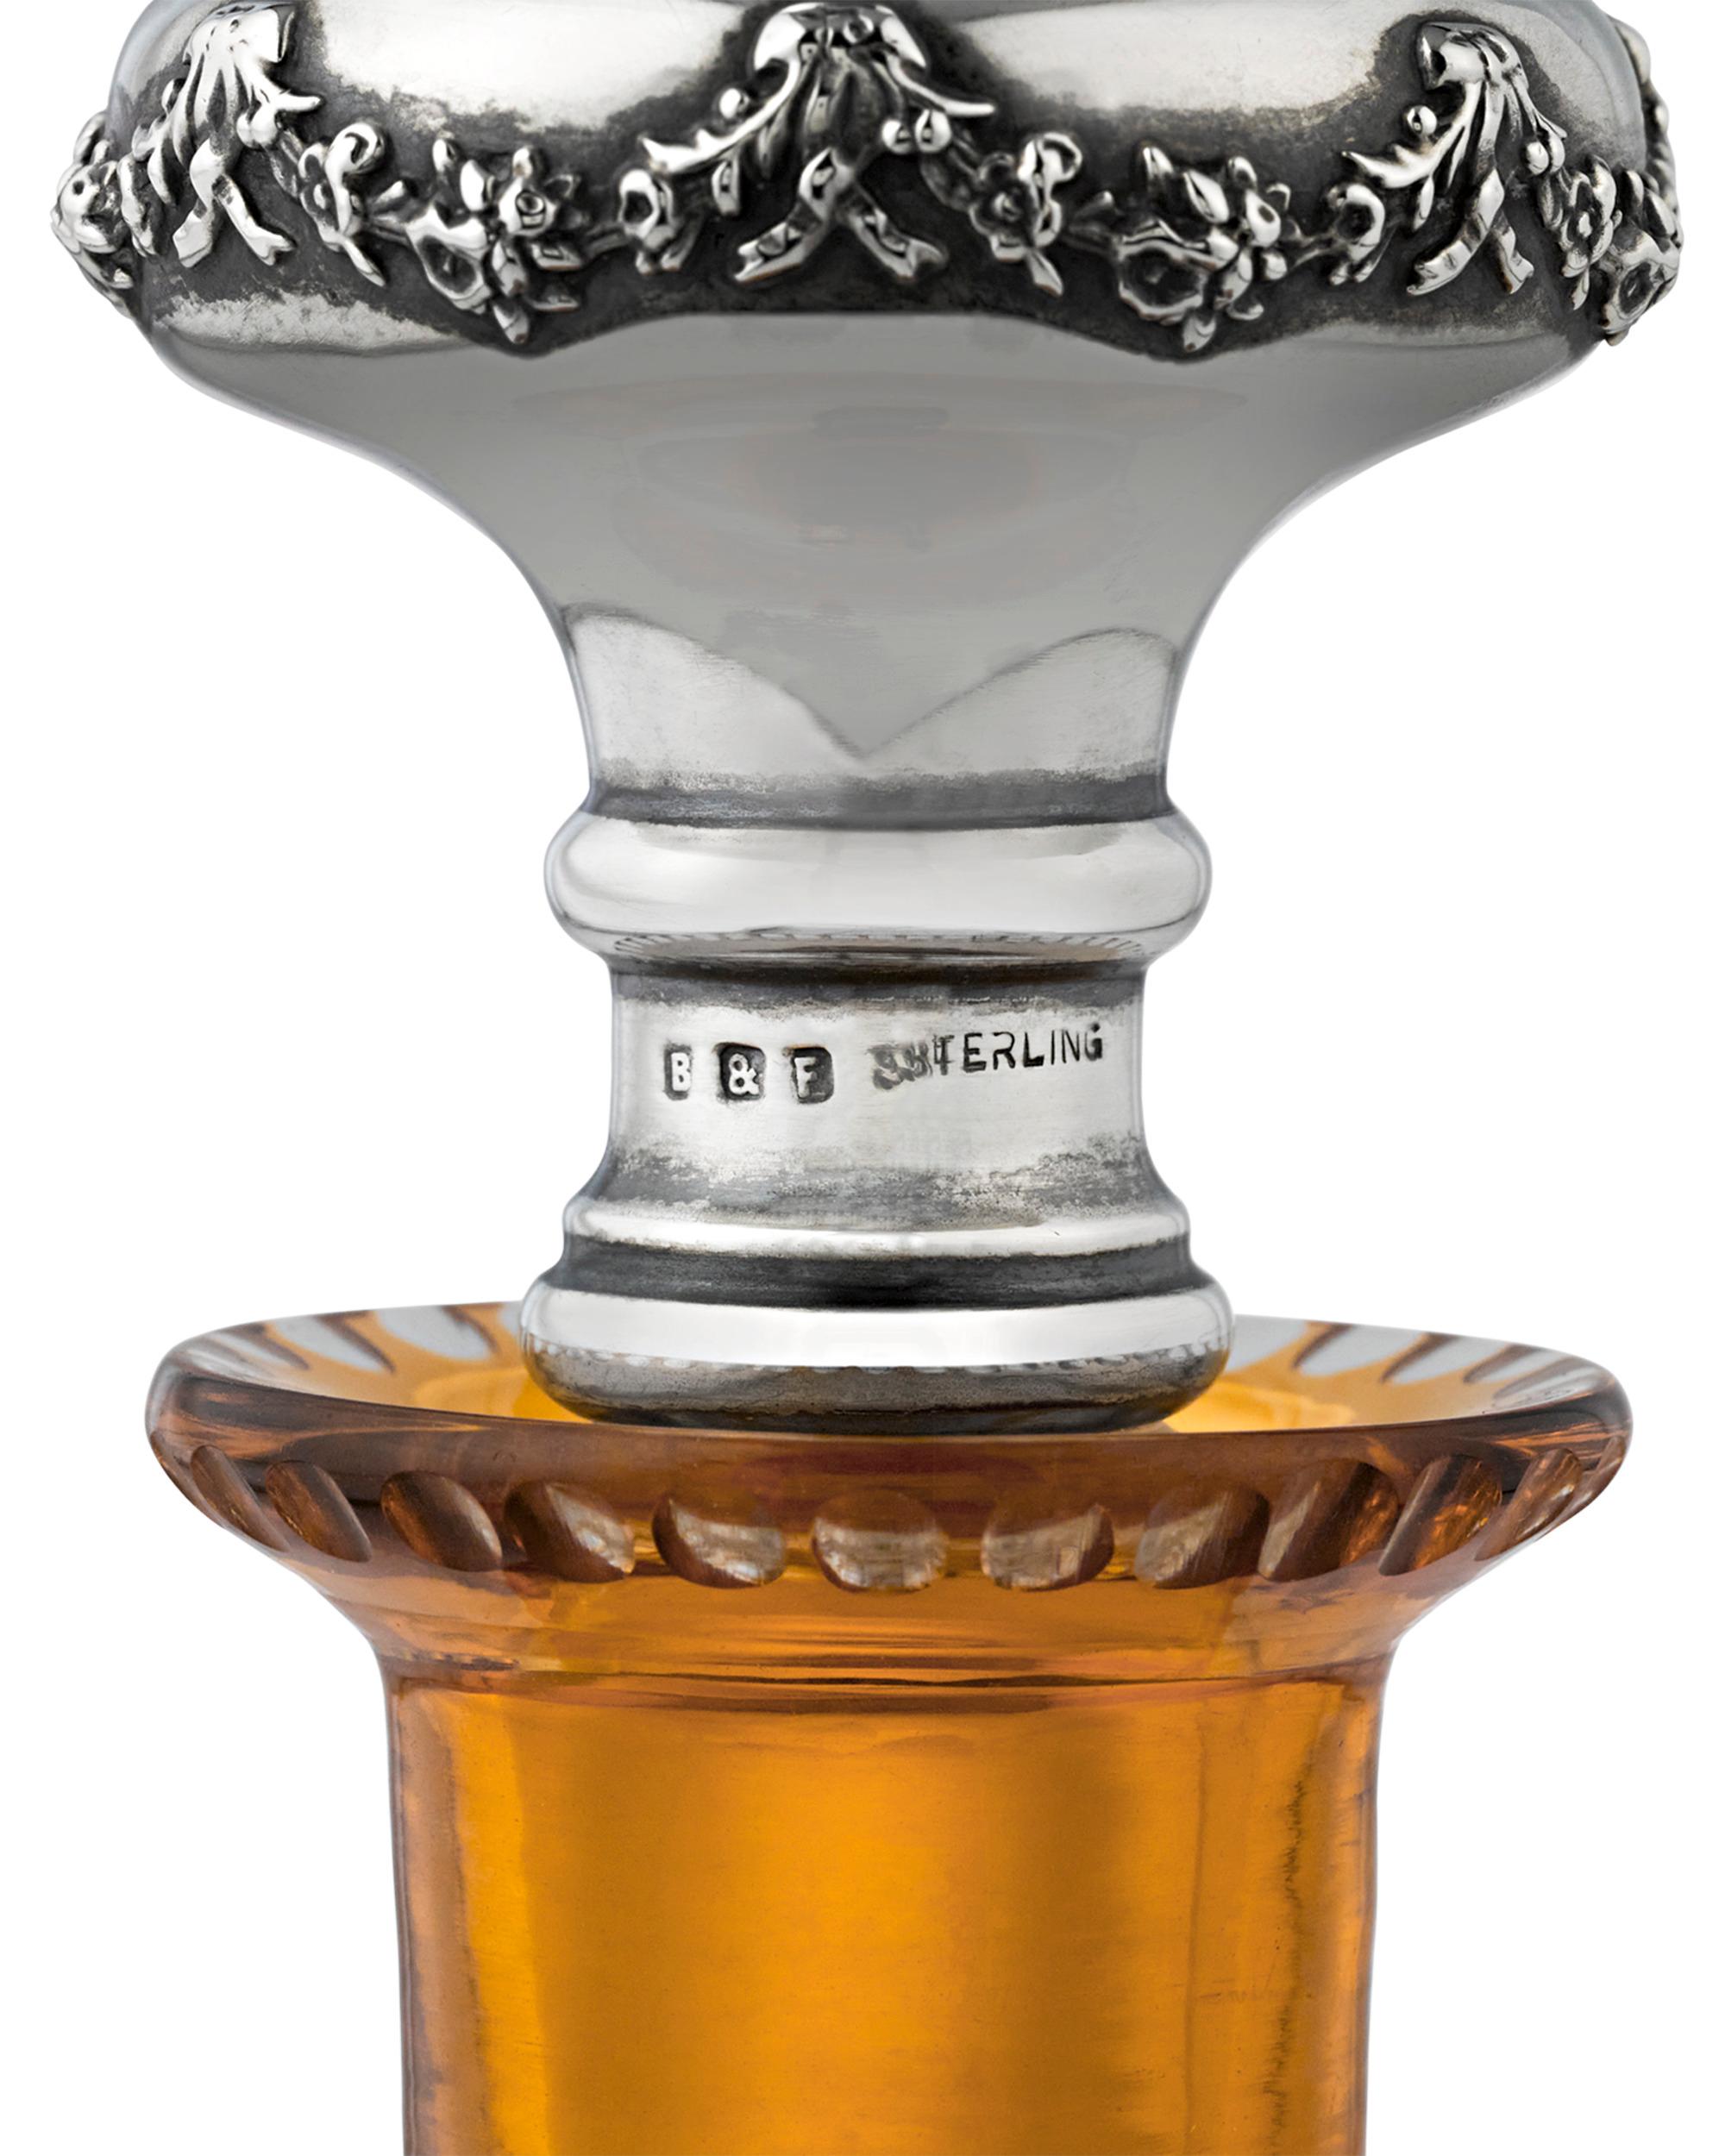 This incredibly rare and exquisitely lovely perfume bottle by celebrated English glassmakers Stevens & Williams features an elegant design on warm cut to clear yellow glass. The fluid curves of the bottle and repousséd sterling silver stopper